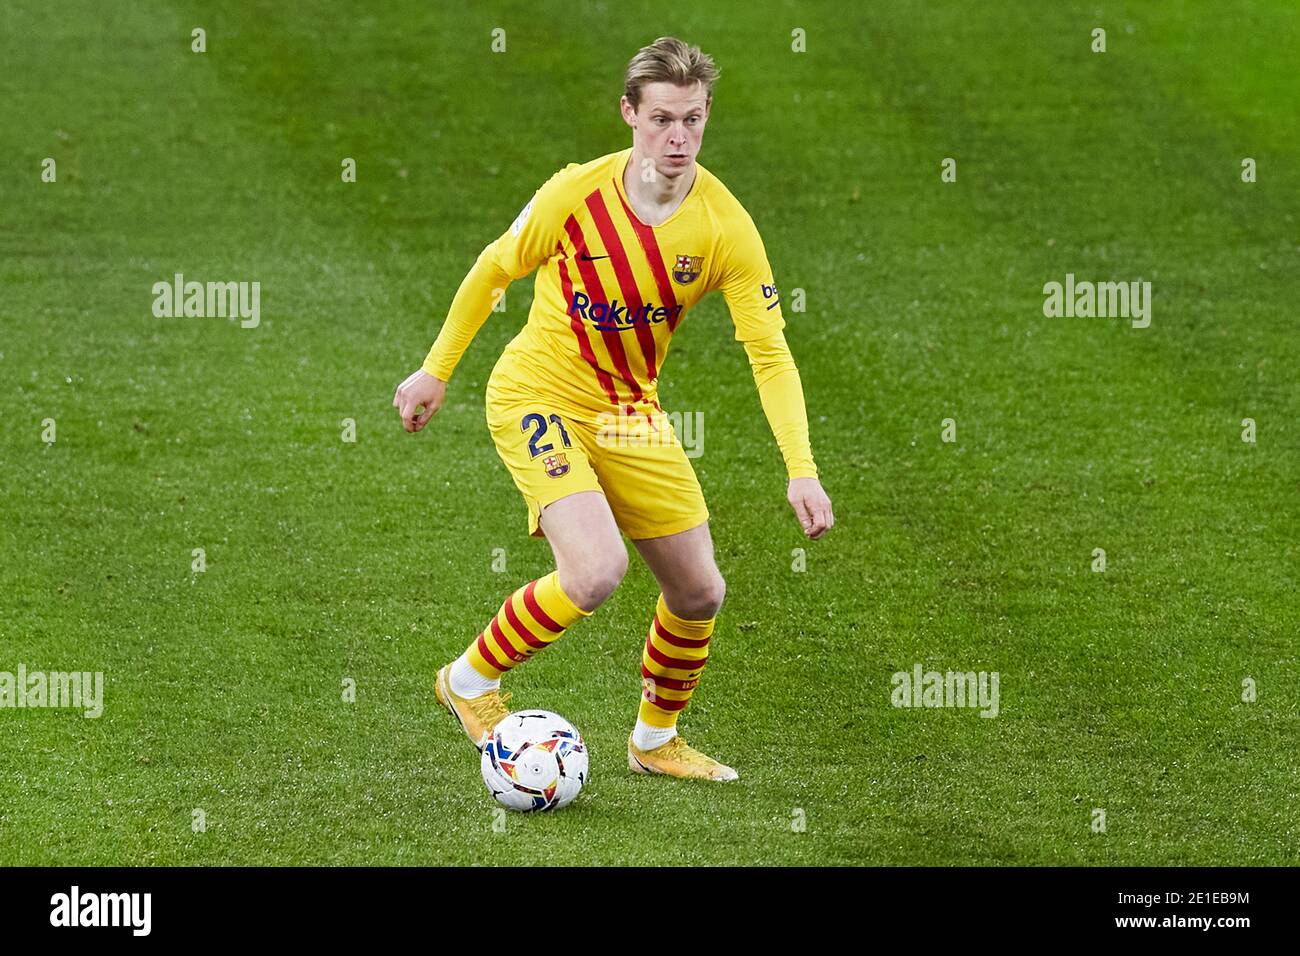 Bilbao, Spain. 06 January, 2021. Frenkie de Jong of FC Barcelona in action during the La Liga match between Athletic Club Bilbao and FC Barcelona played at San Mames Stadium. Credit: Ion Alcoba/Capturasport/Alamy Live News Stock Photo